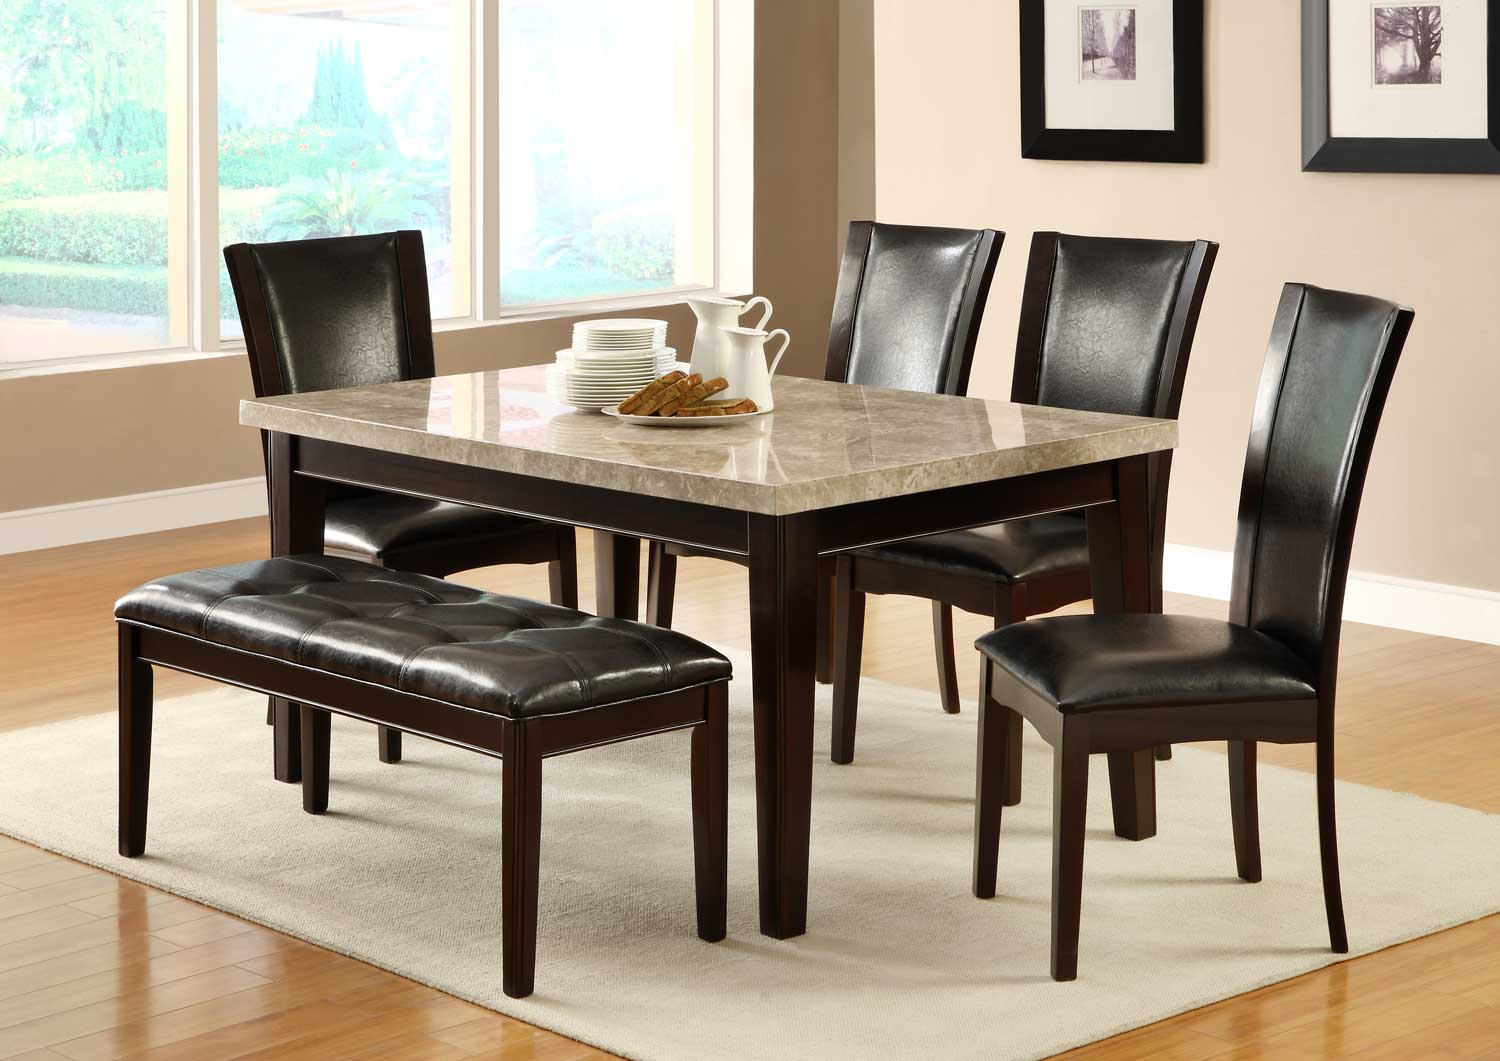 H2529 MARBLE DINING SET